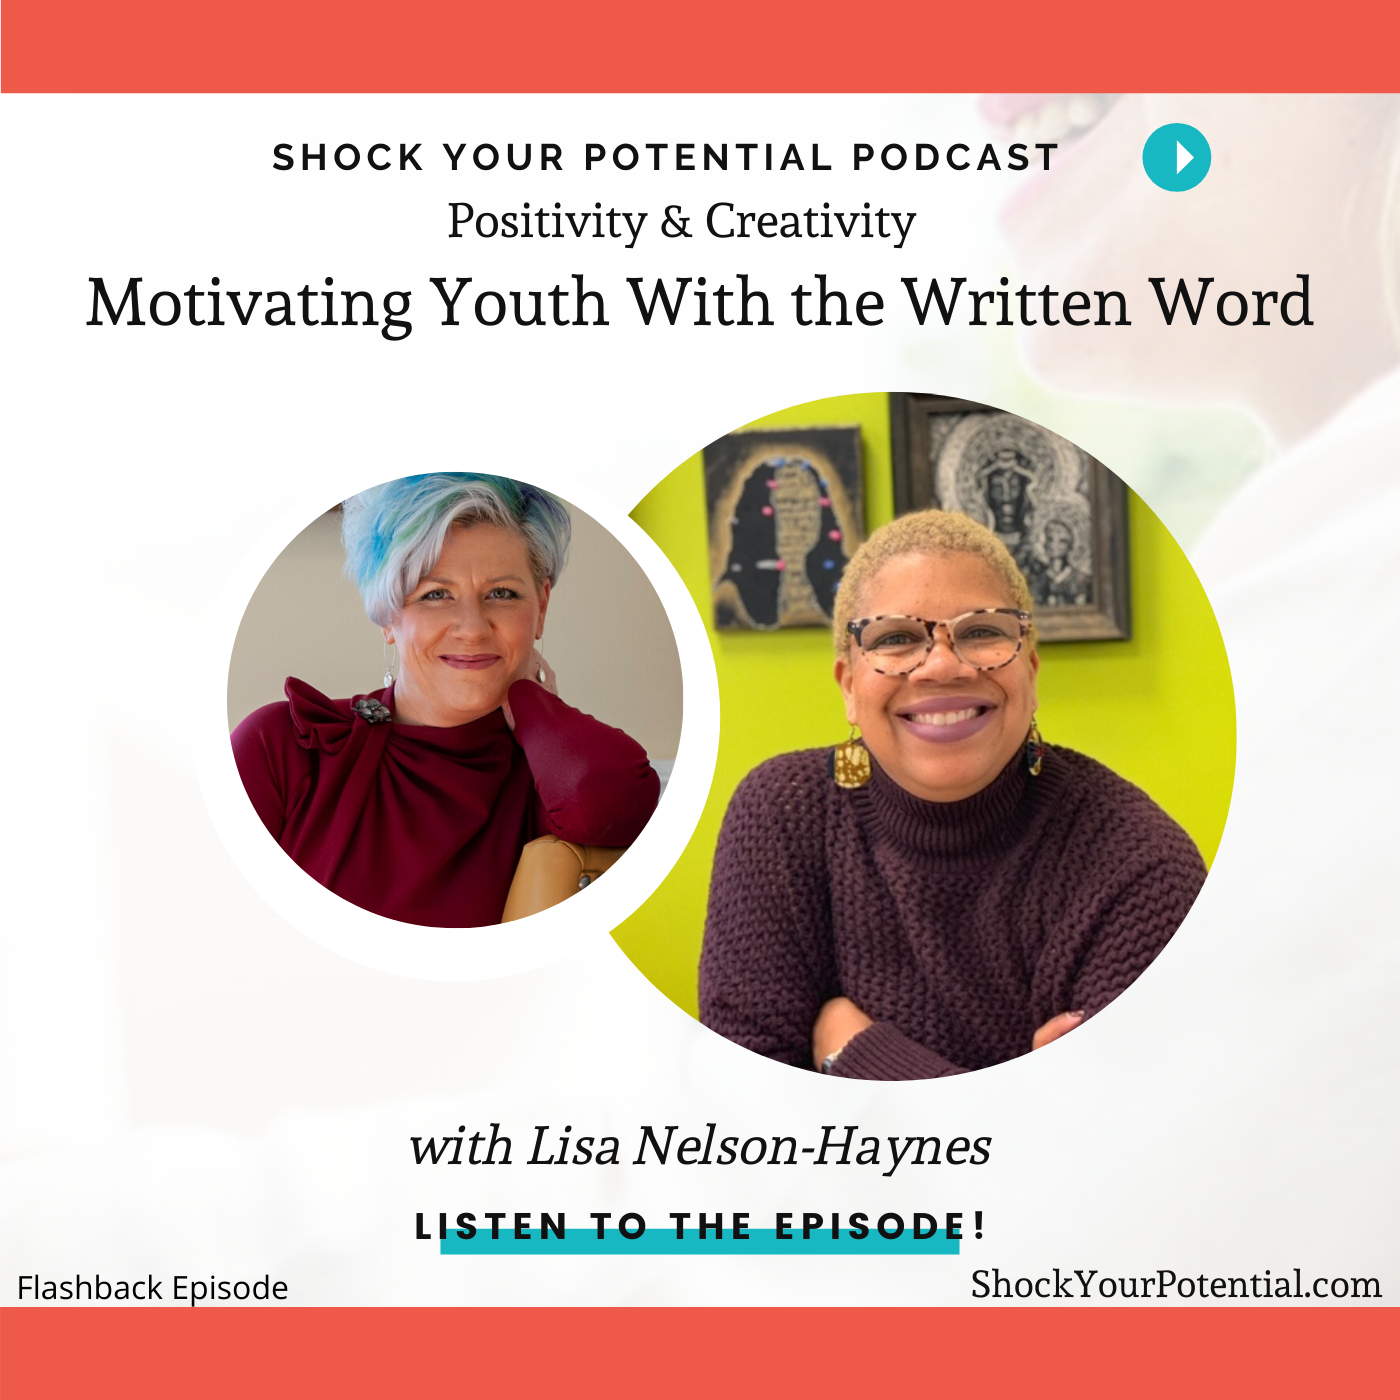 Motivating Youth With the Written Word – Lisa Nelson-Haynes